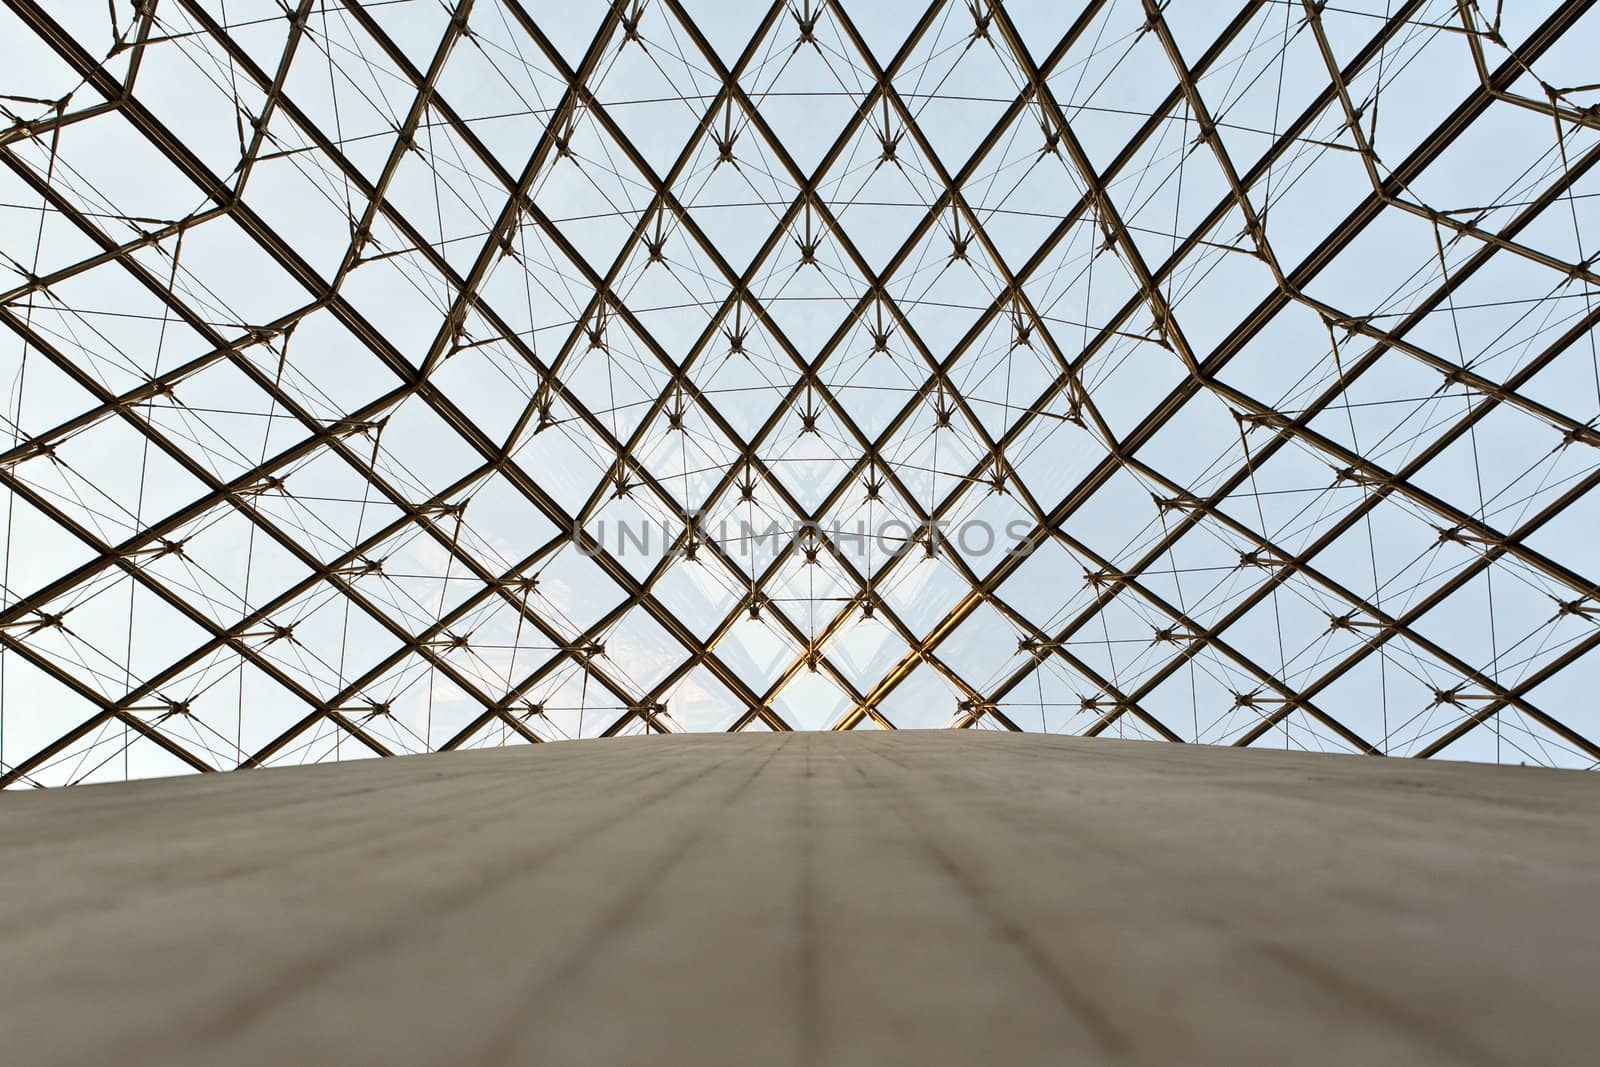 The photo is made under a glass dome of a pyramid in the Louvre